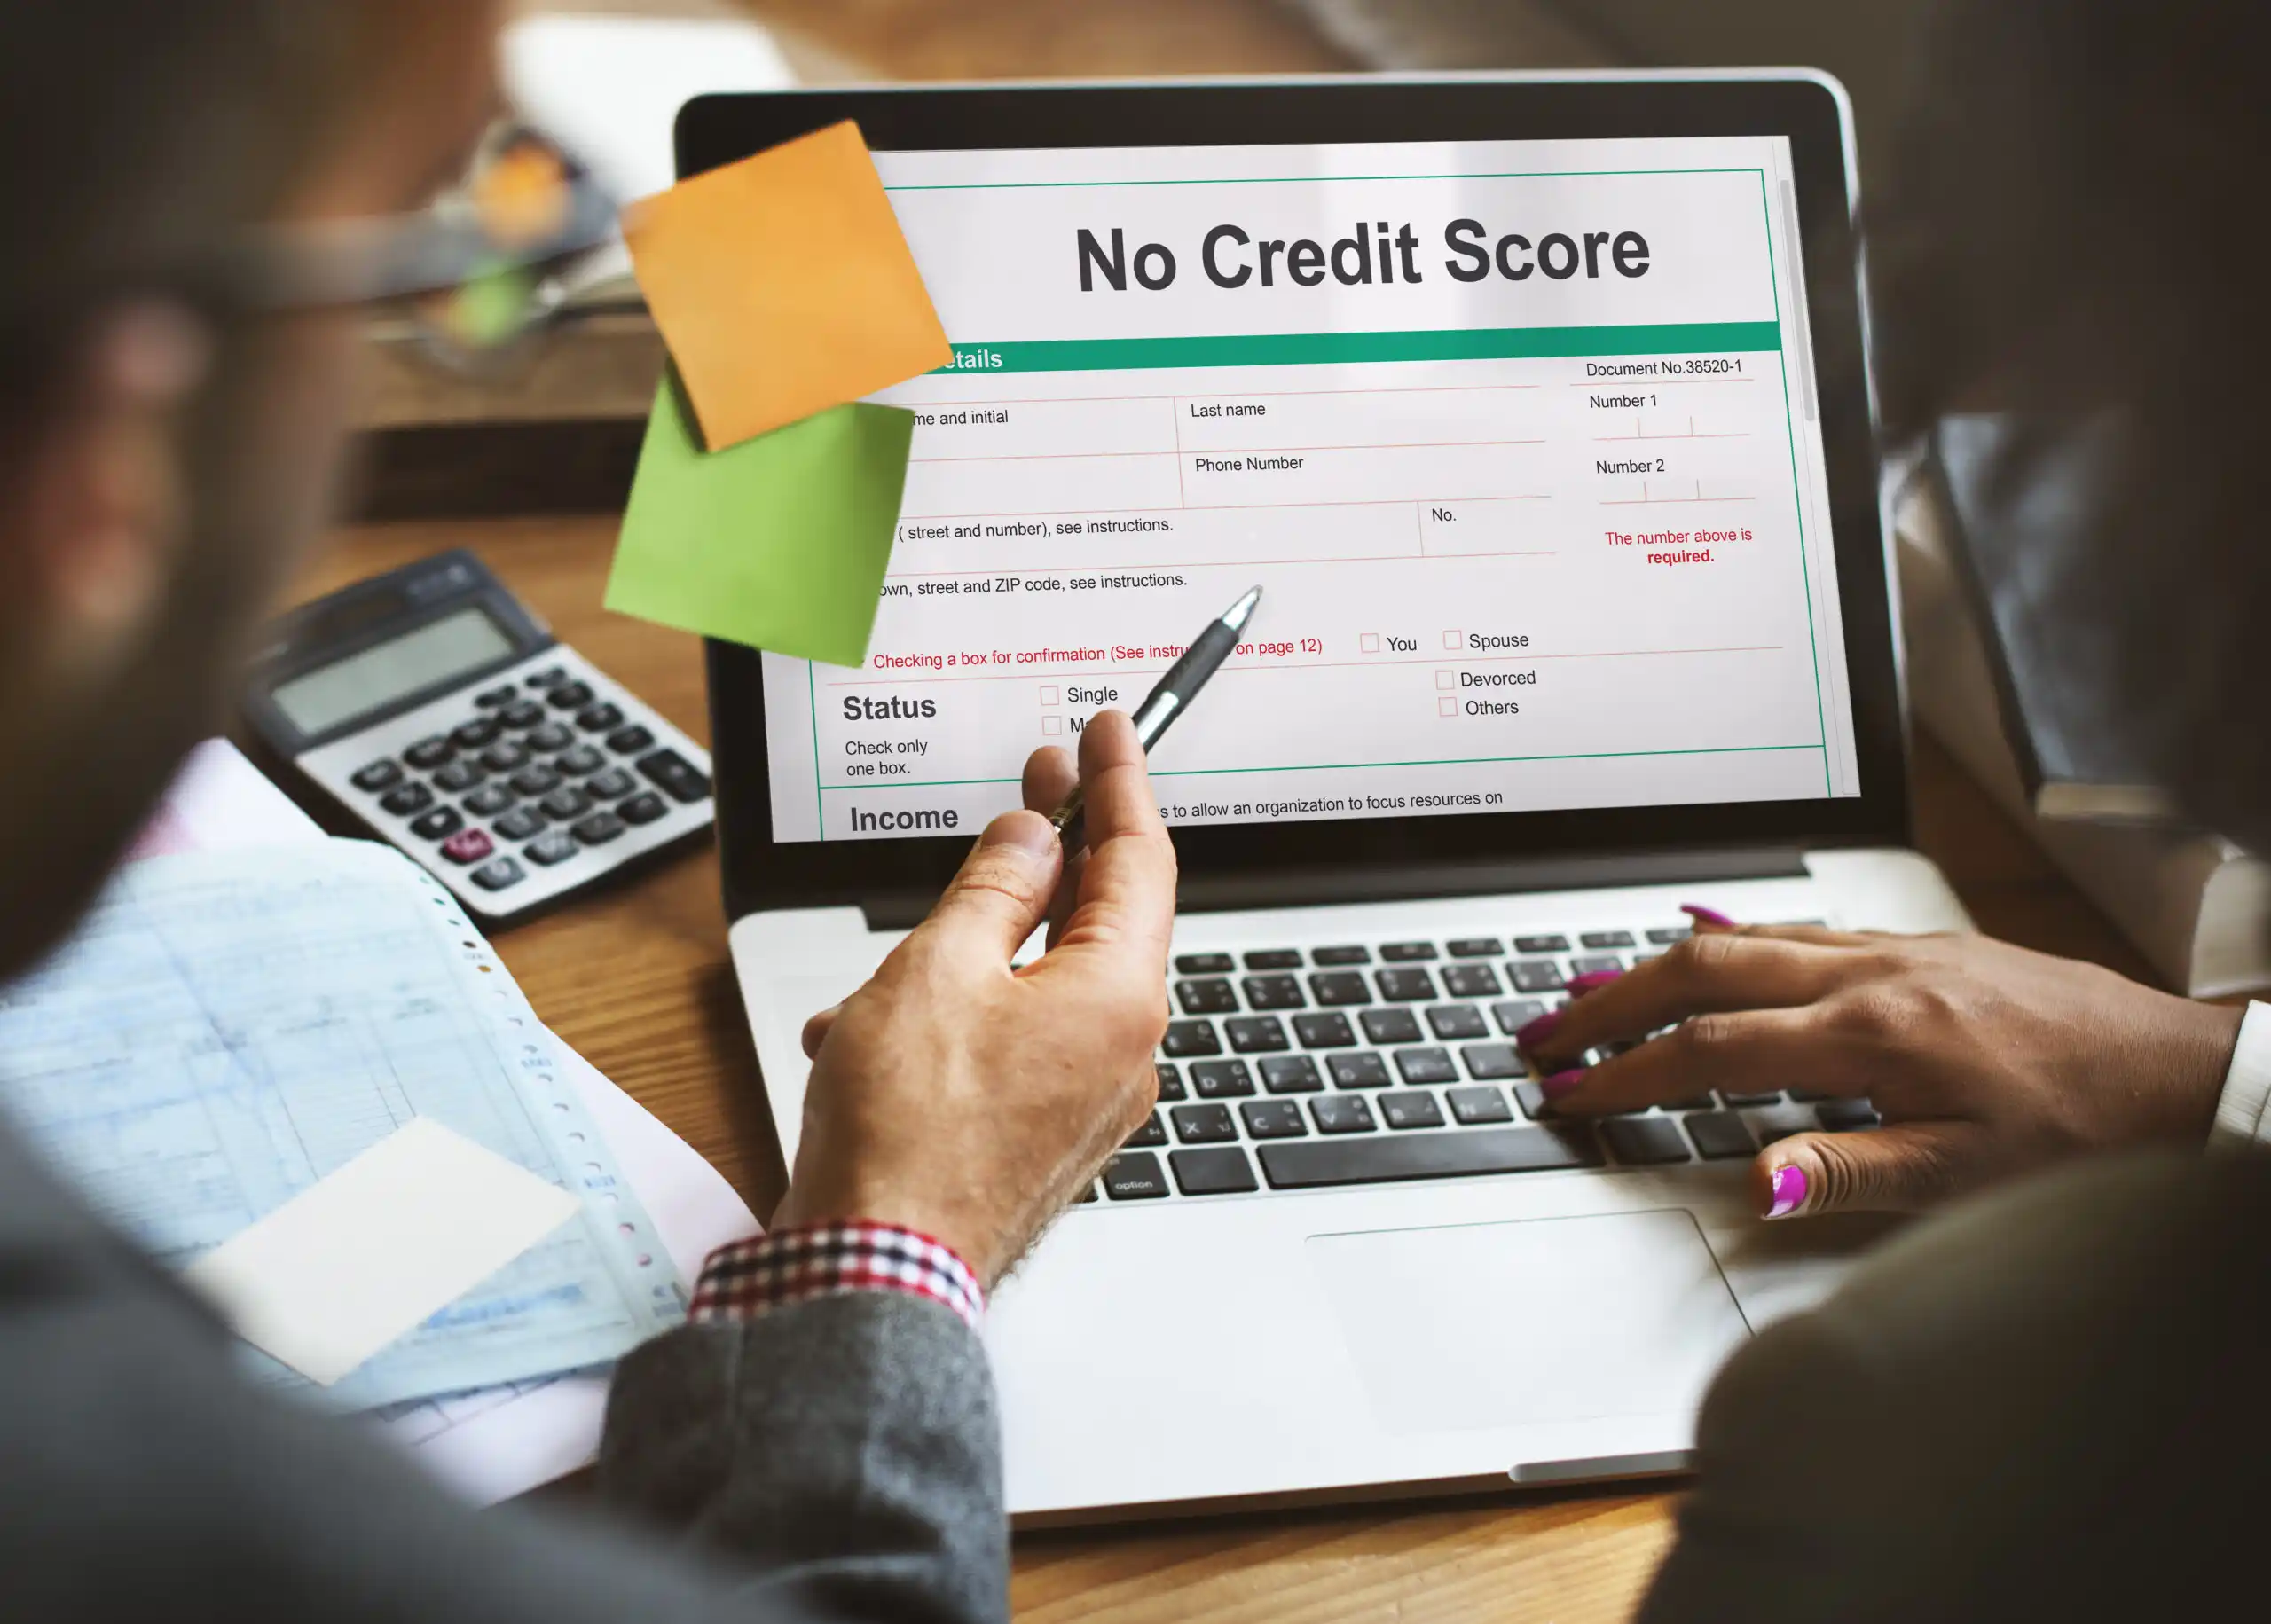 Can You Live Entirely Without Credit?